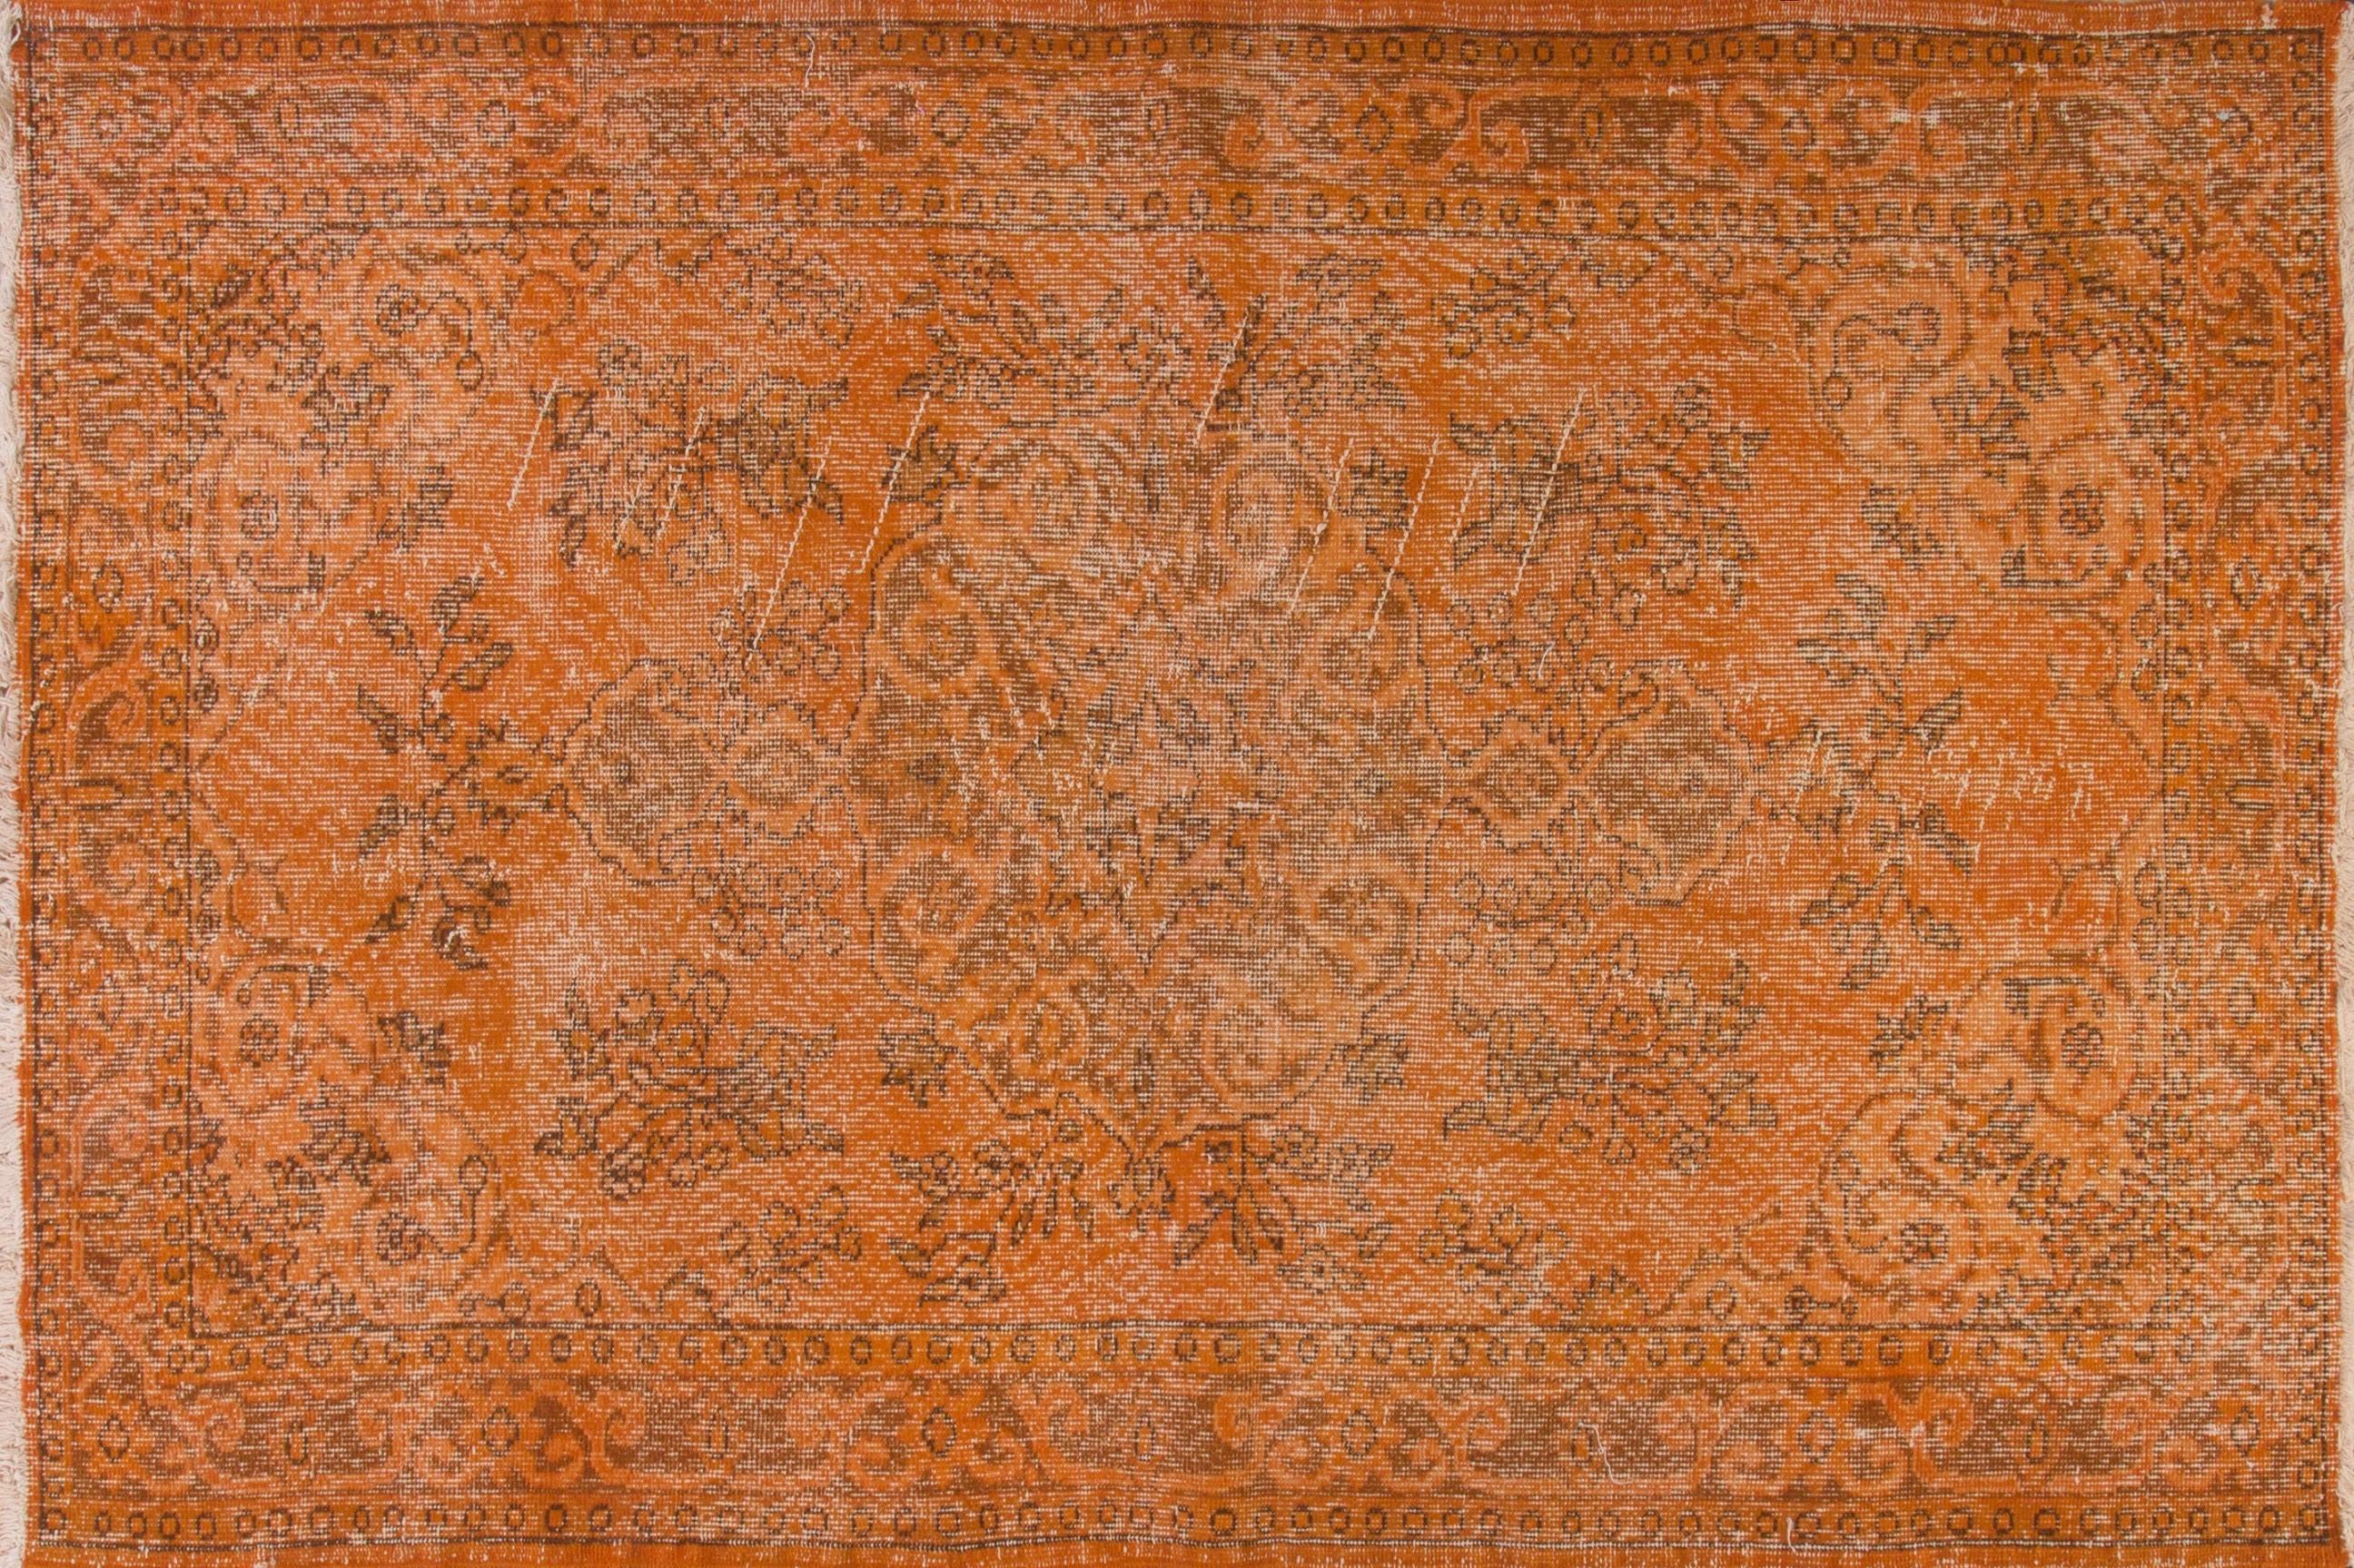 Modern 4x7.4 Ft Home Decor Vintage Hand Knotted Oriental Rug Overdyed in Burnt Orange